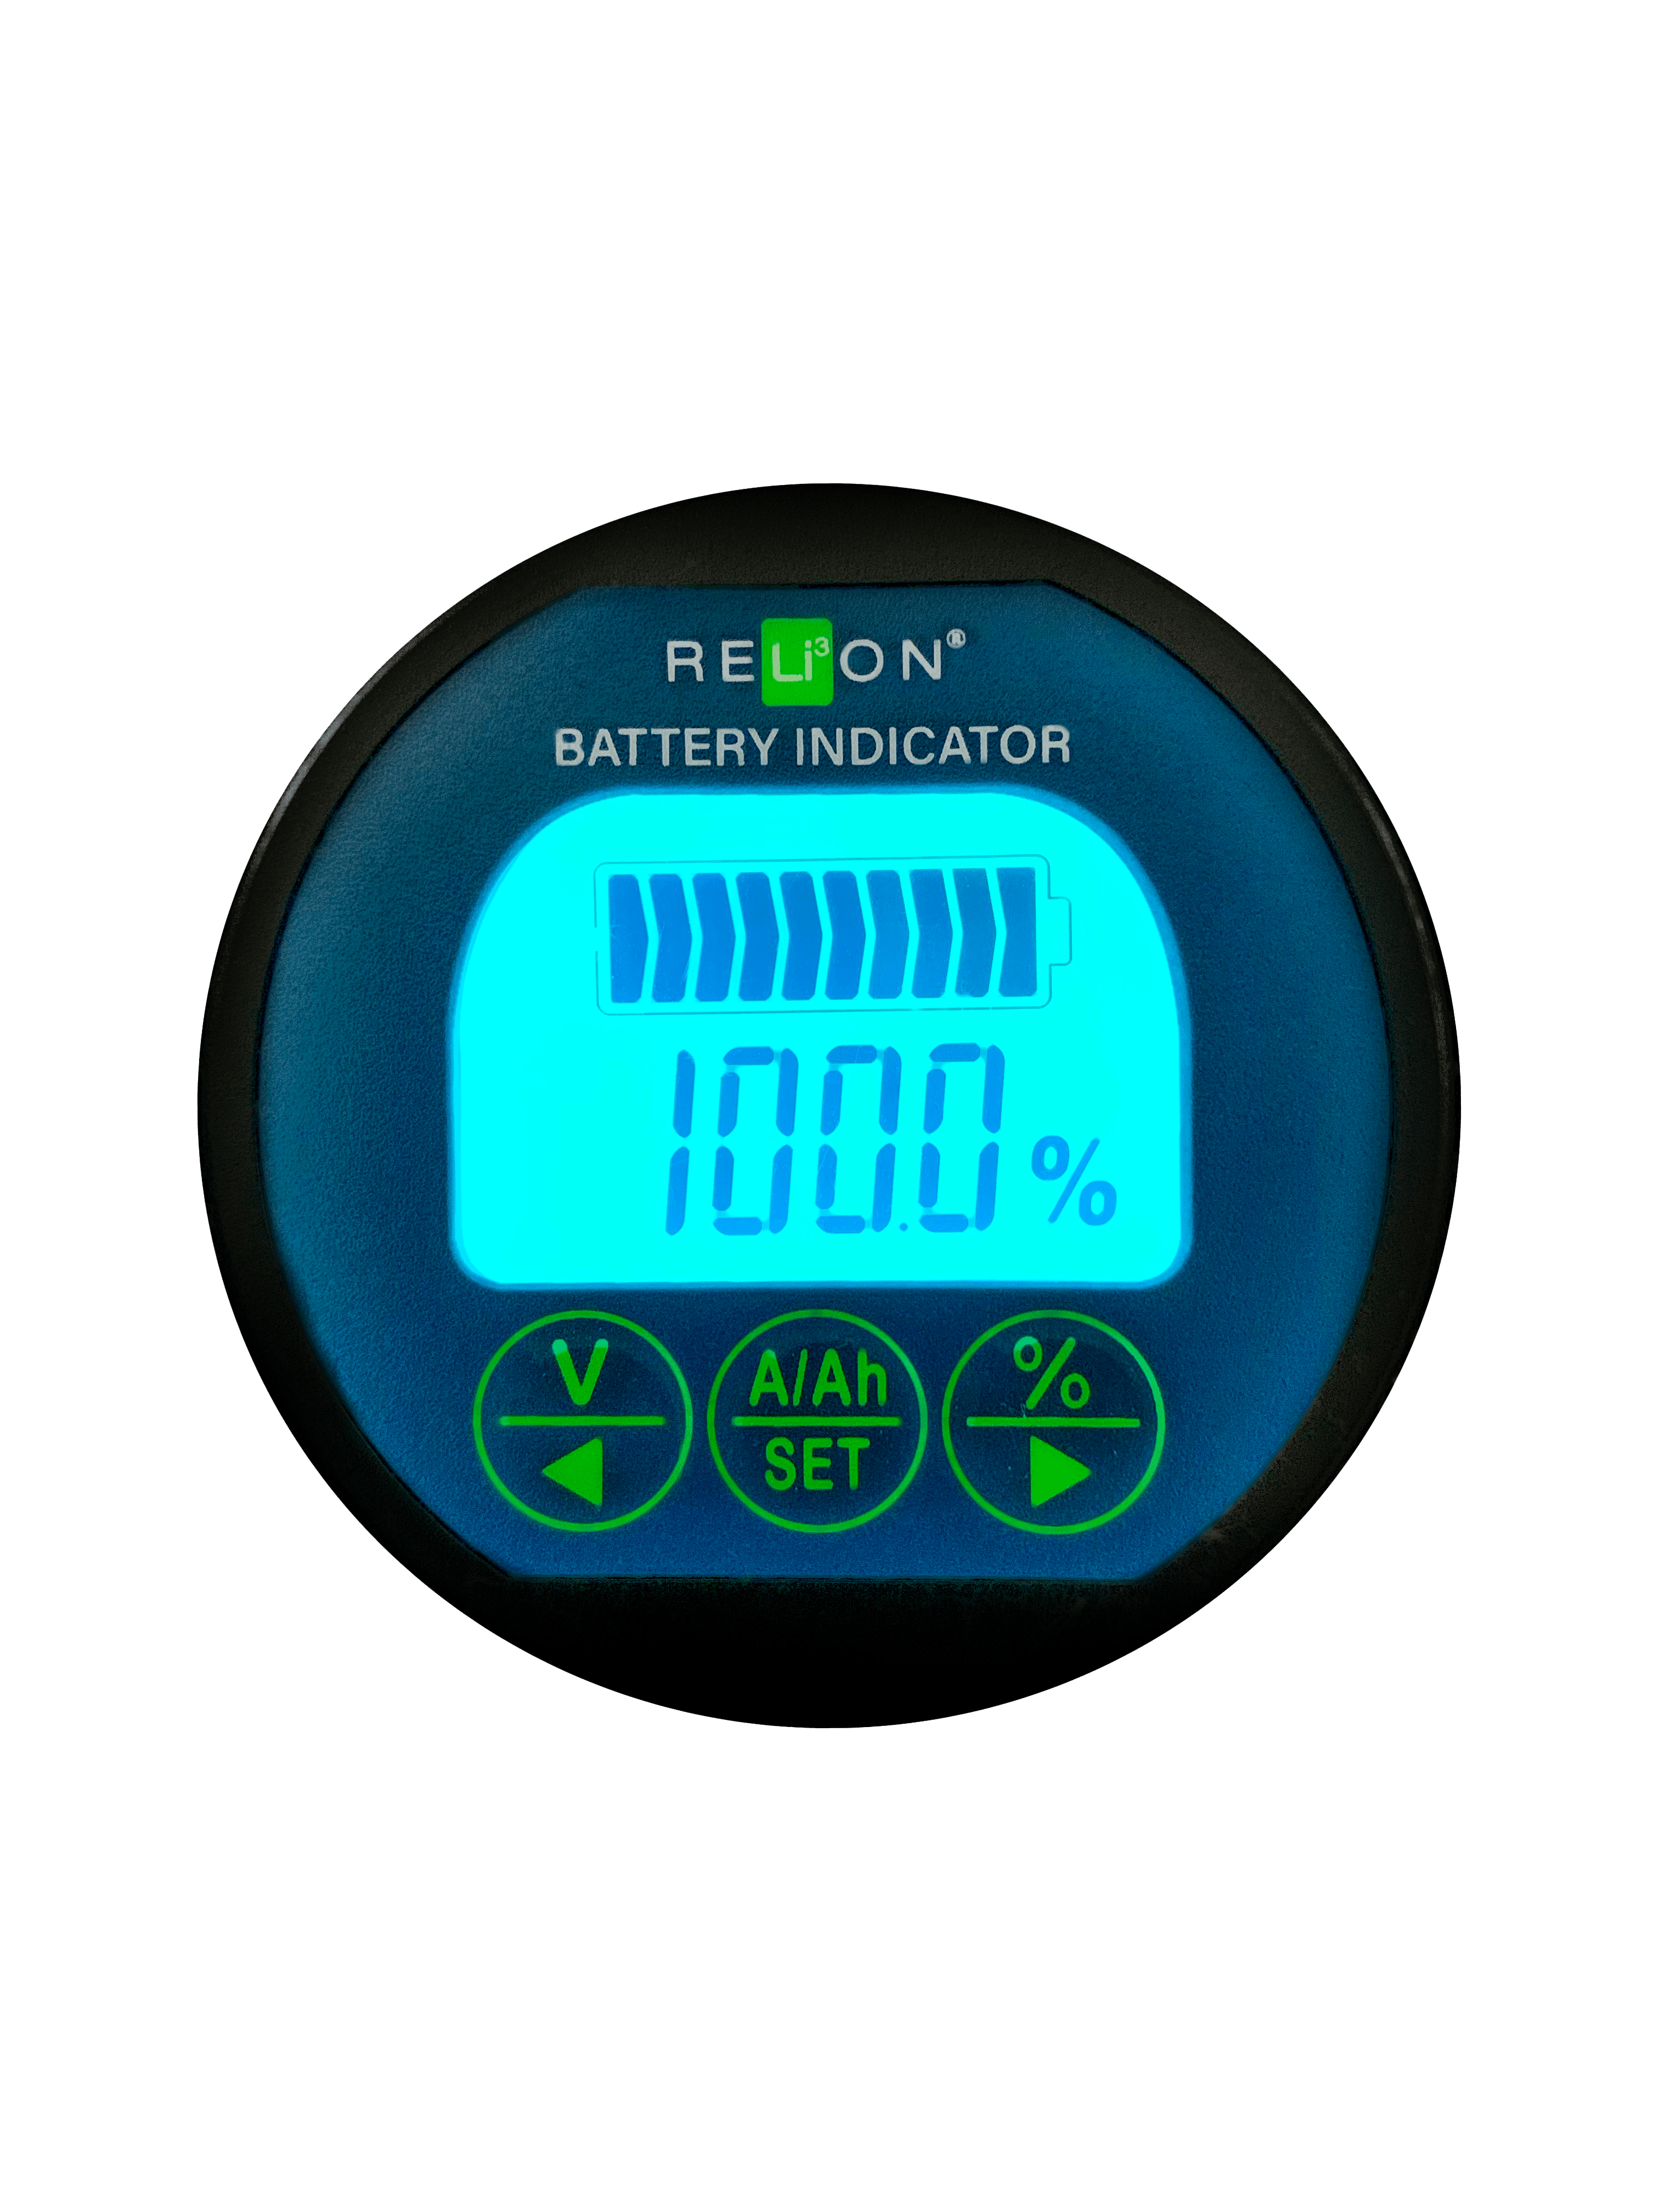 RELiON LiFePO4 Deep Cycle Lithium Batteries - Battery Indicator